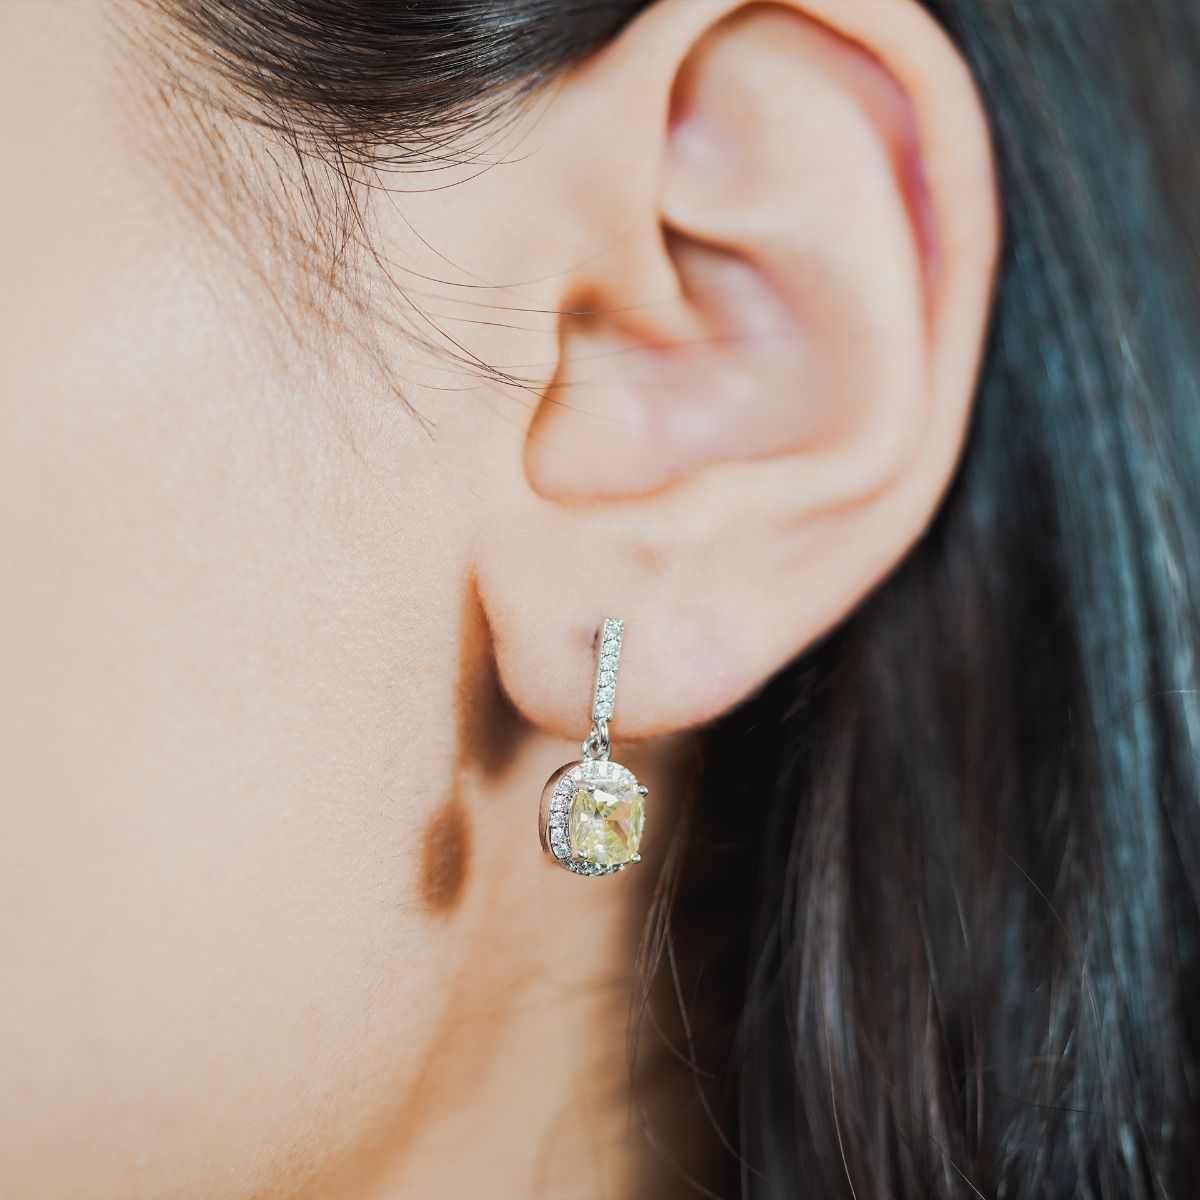 These striking stud drop earrings are set with flawlessly cut cubic zirconia stones, surrounding a dazzling canary cushion cut centre stone. Wear to add timeless glamour to any look.